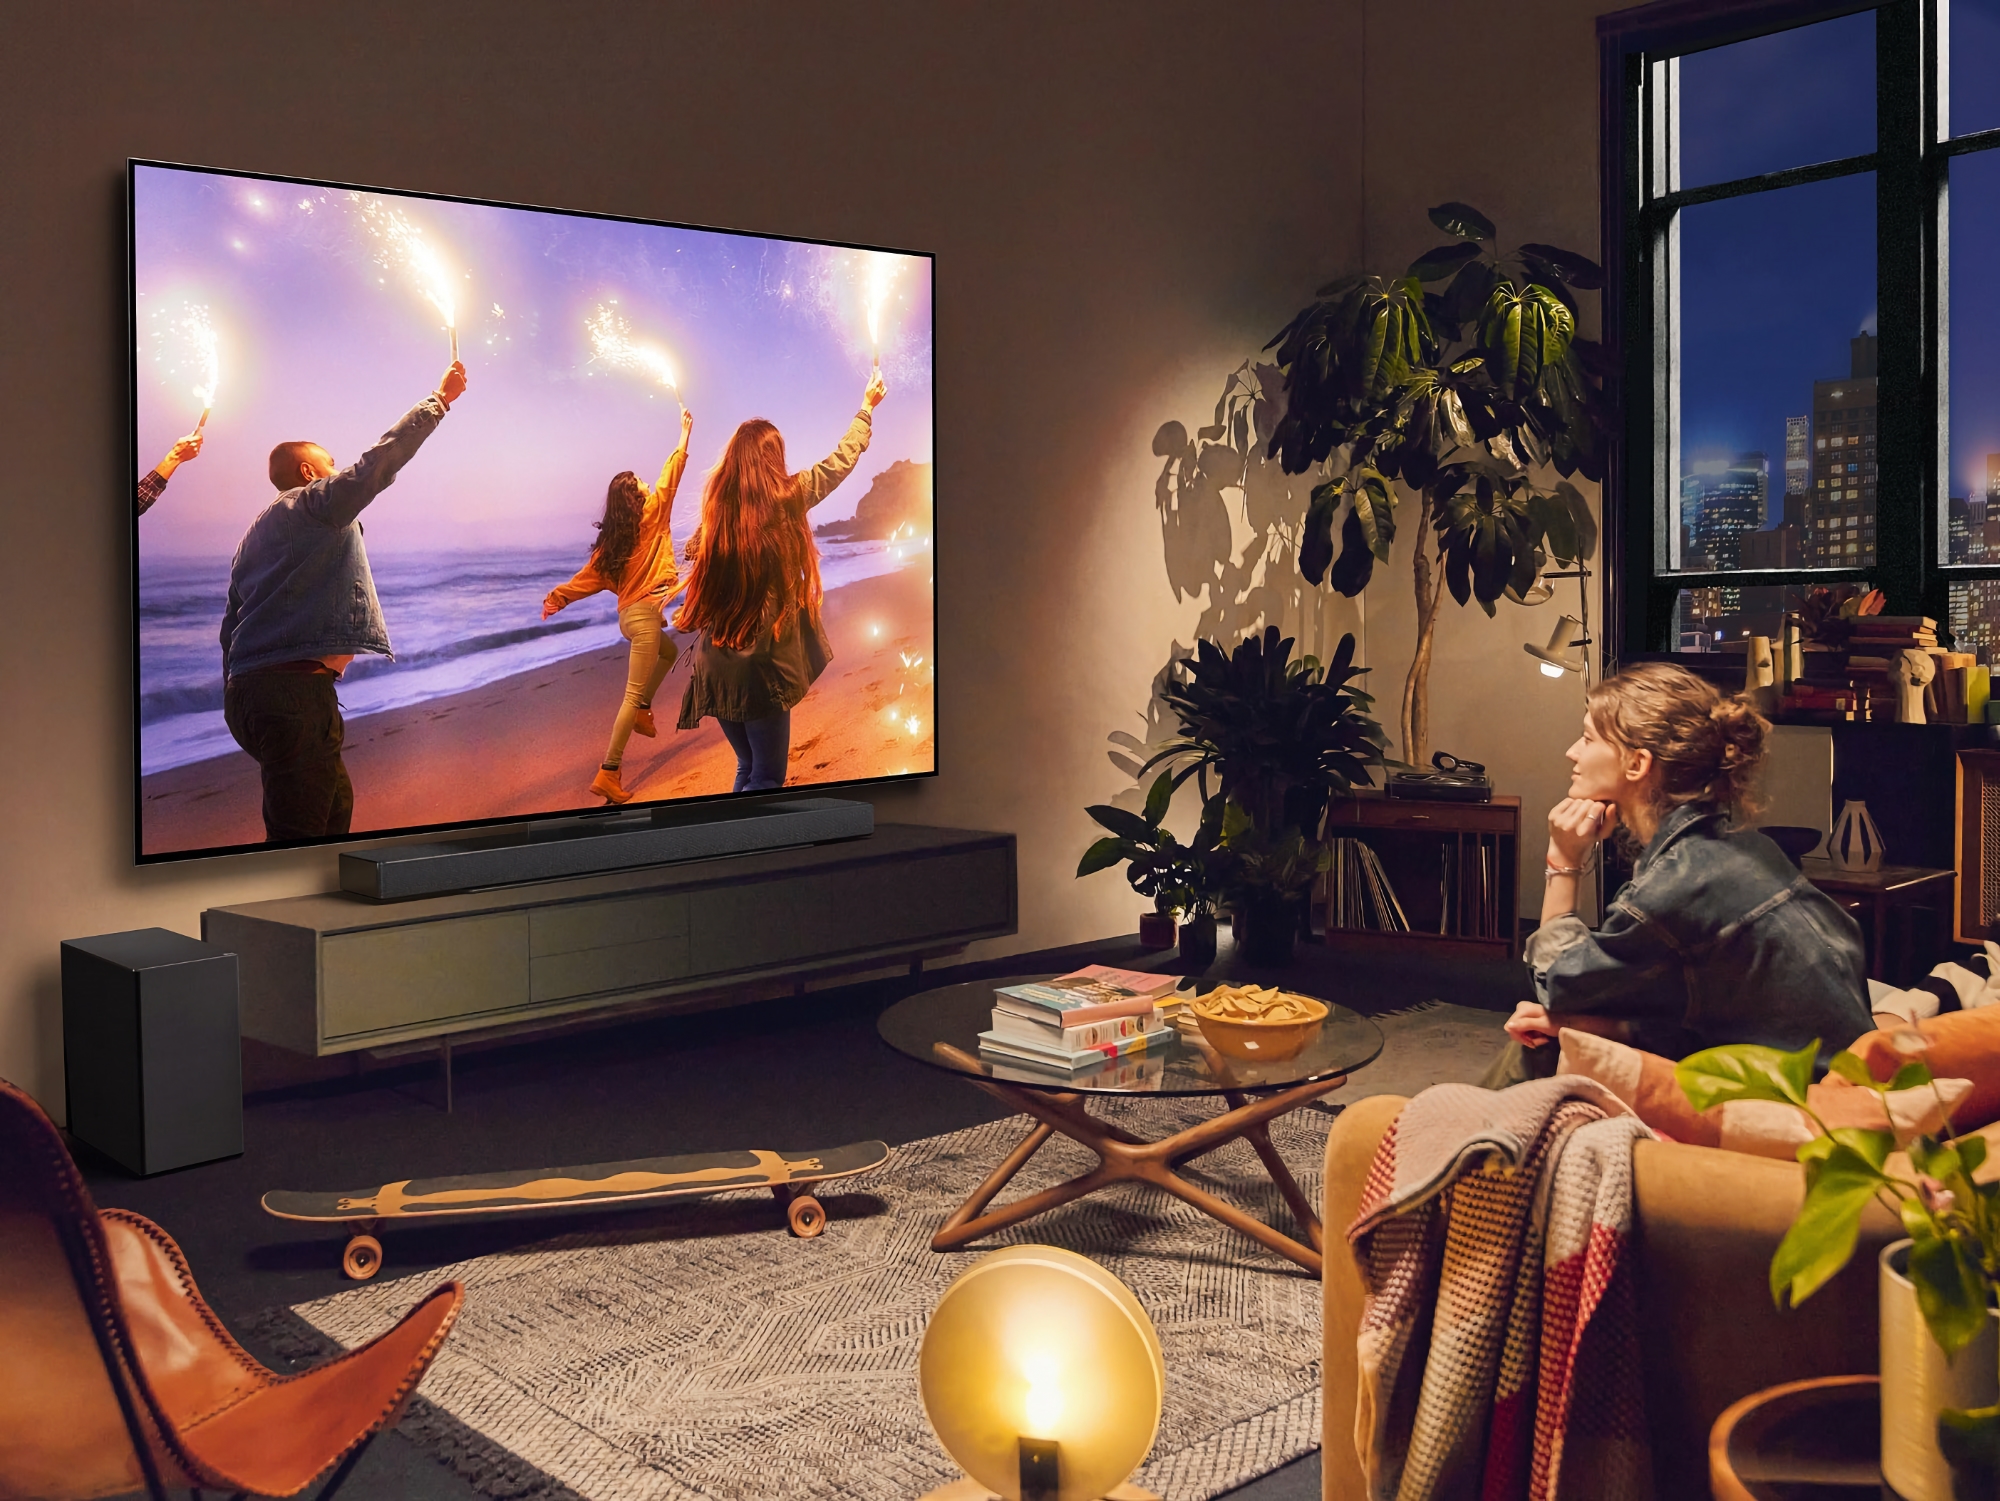 LG OLED evo C4 and G4: a range of gaming TVs with 4K screens from 42" to 97" and 144Hz refresh rate support